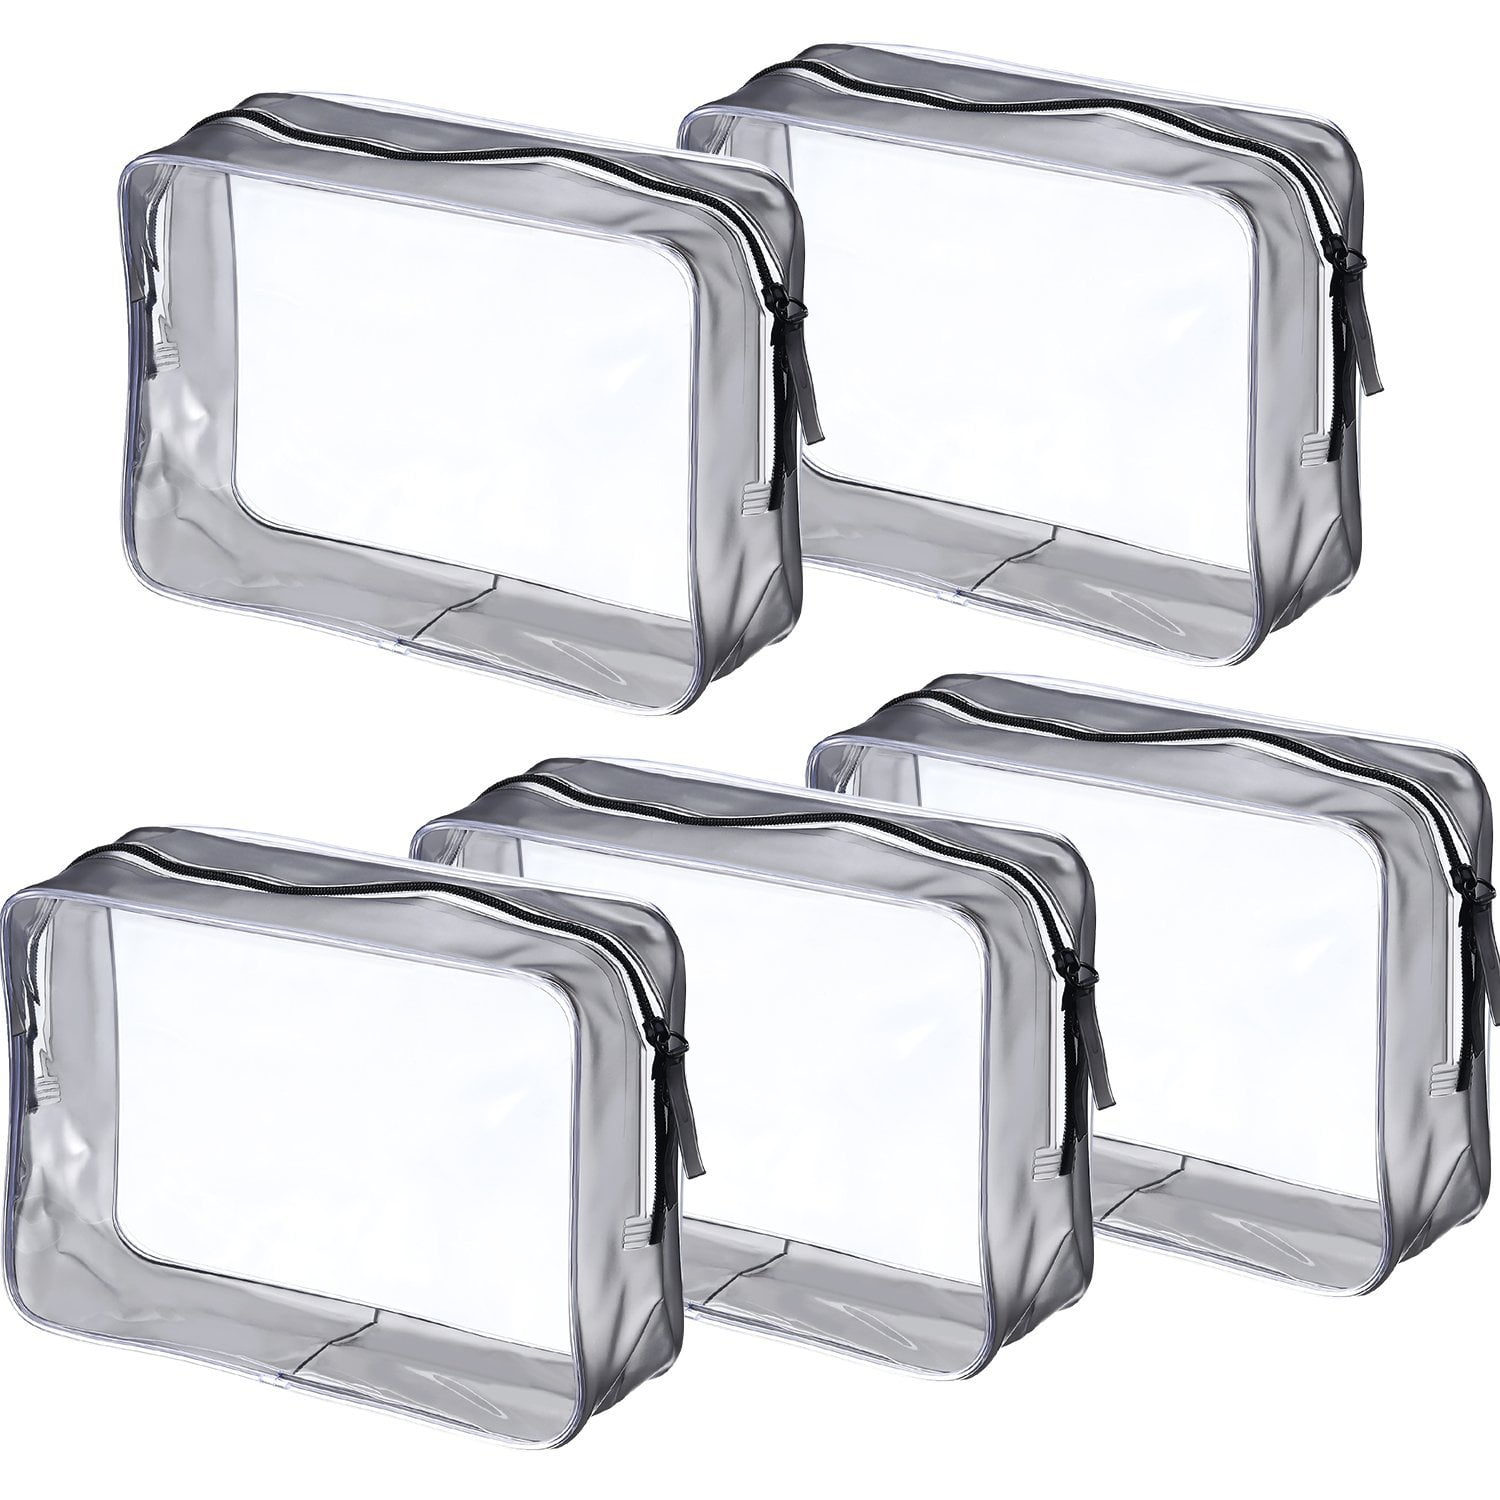 Pangda 5 Pack Clear PVC Zippered Toiletry Carry Pouch Portable Cosmetic ...